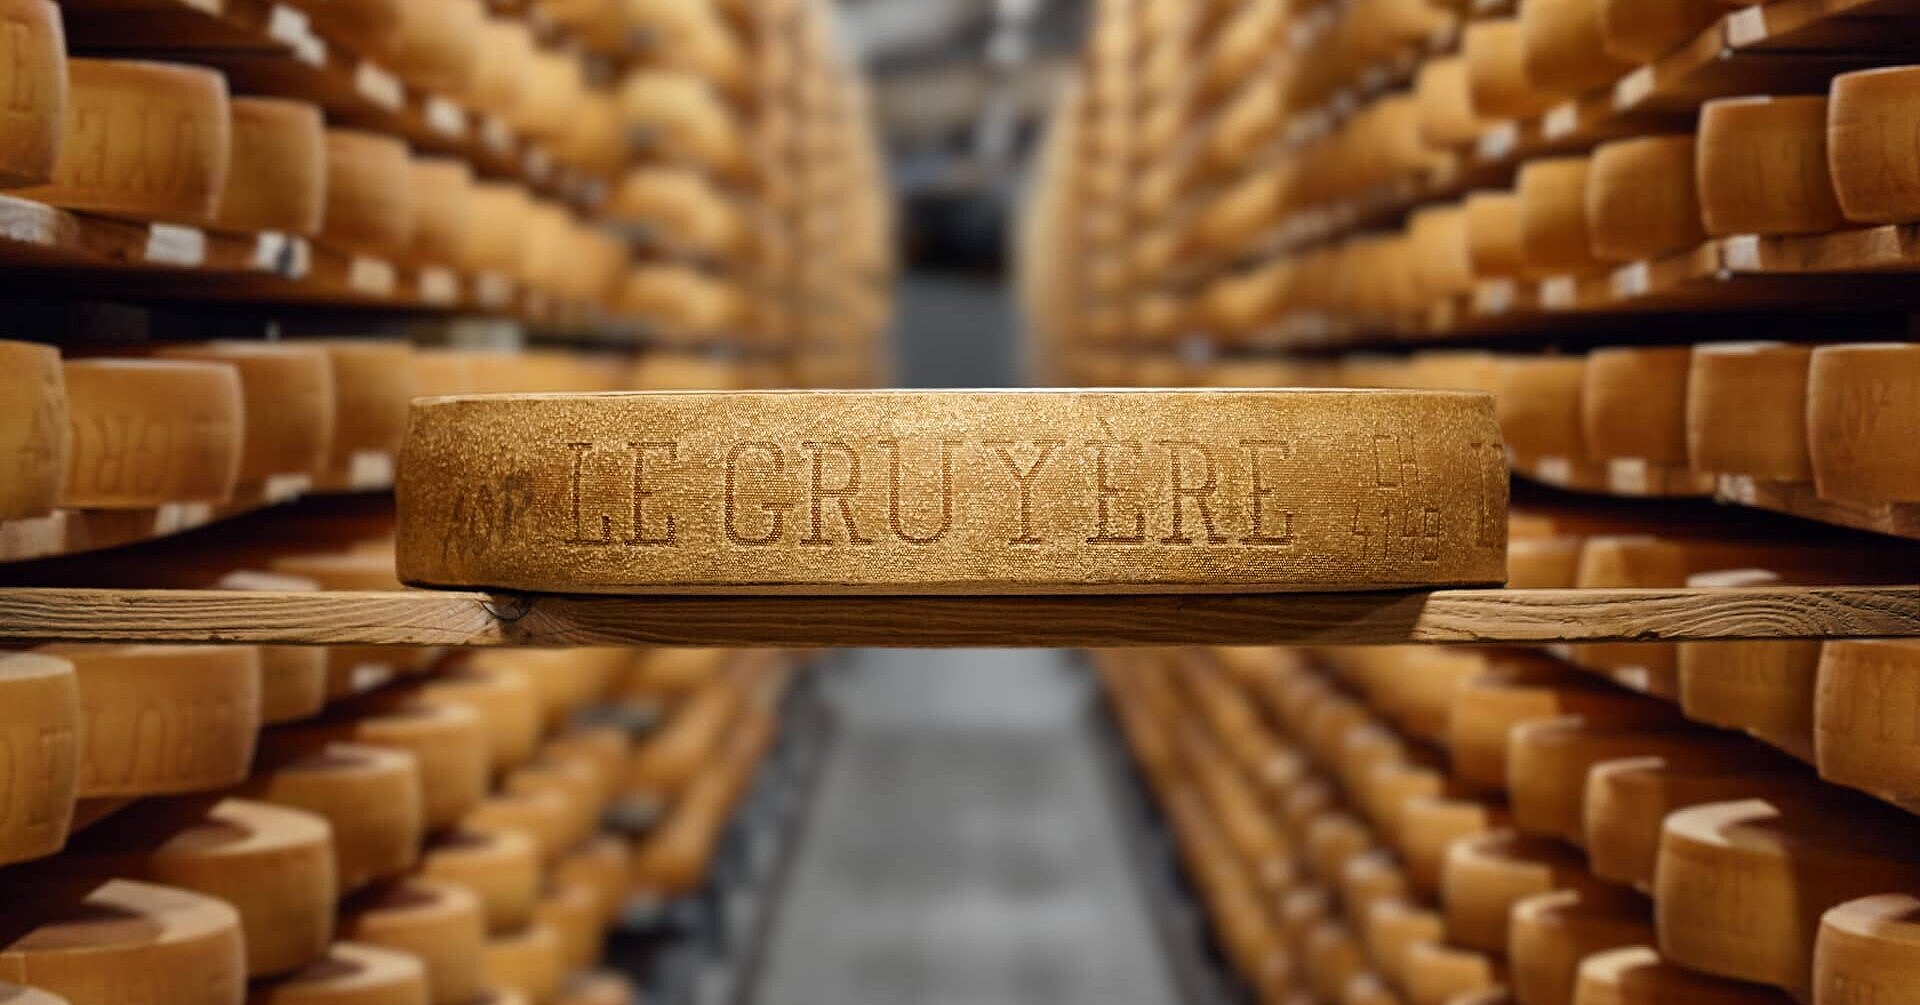 Le Gruyère AOP - An artisanal know-how, a tradition since 1115